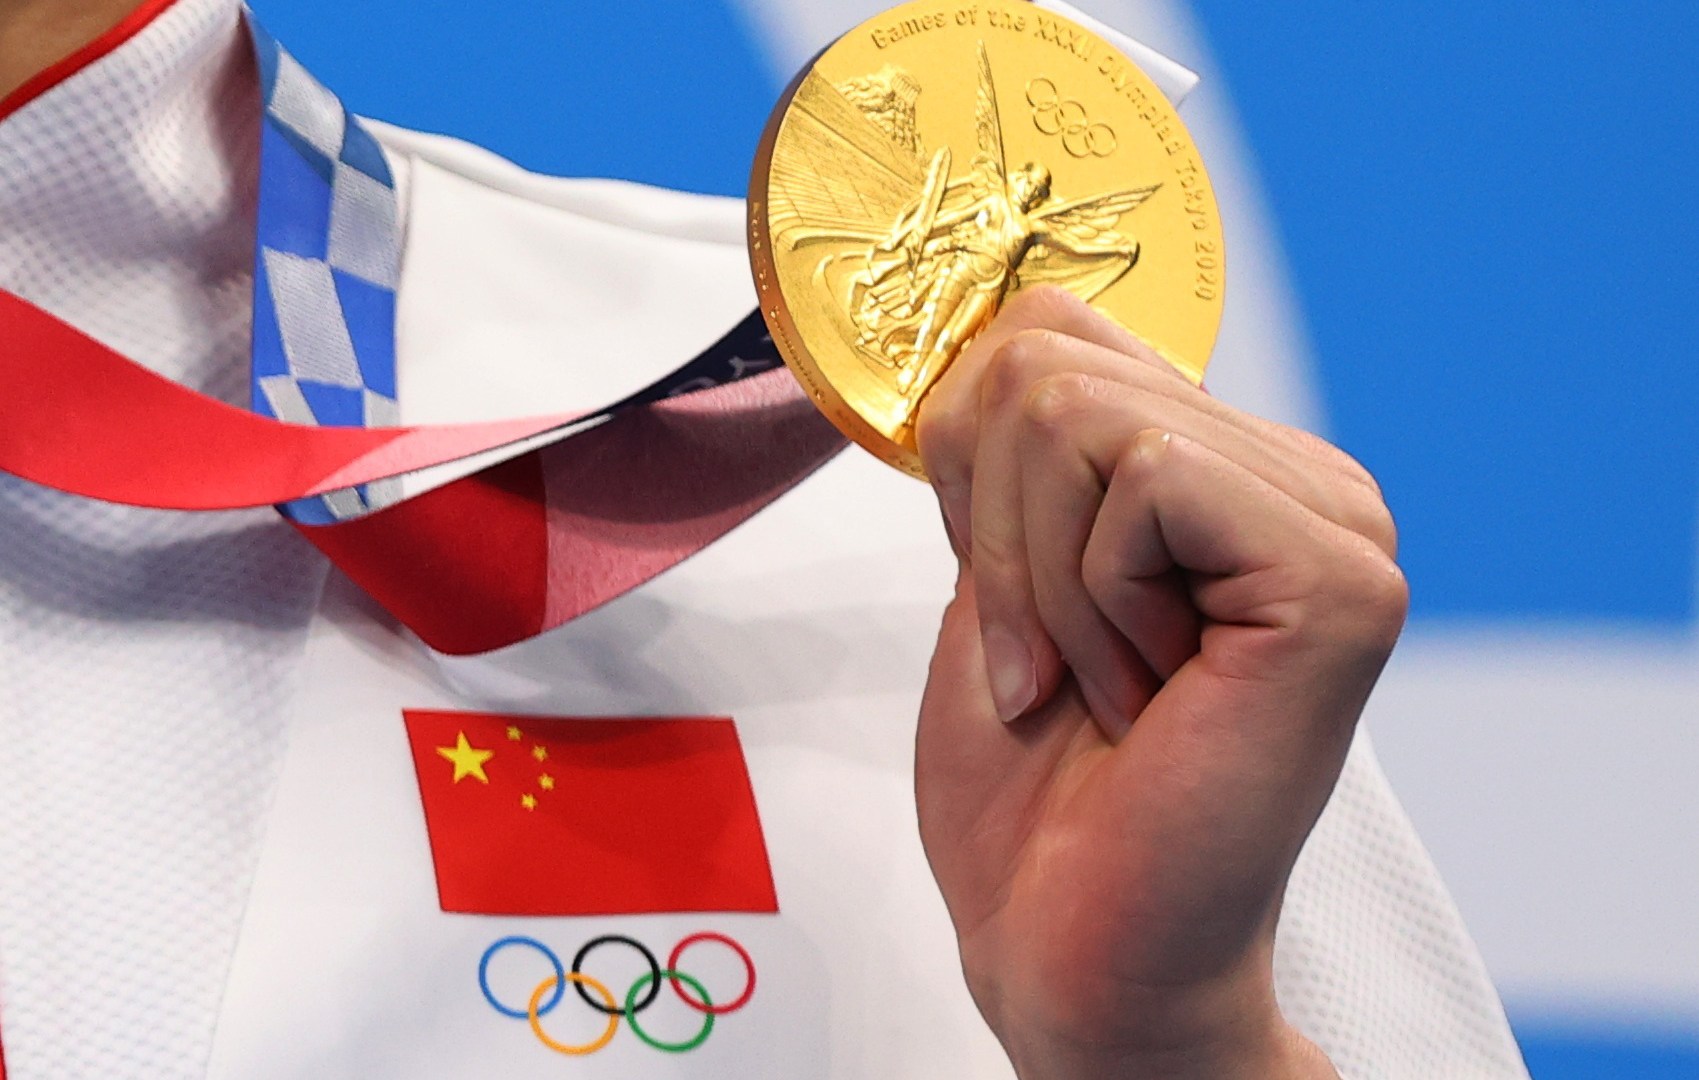 ‘Fake news’: What to know about Chinese Olympic swimmers’ doping scandal